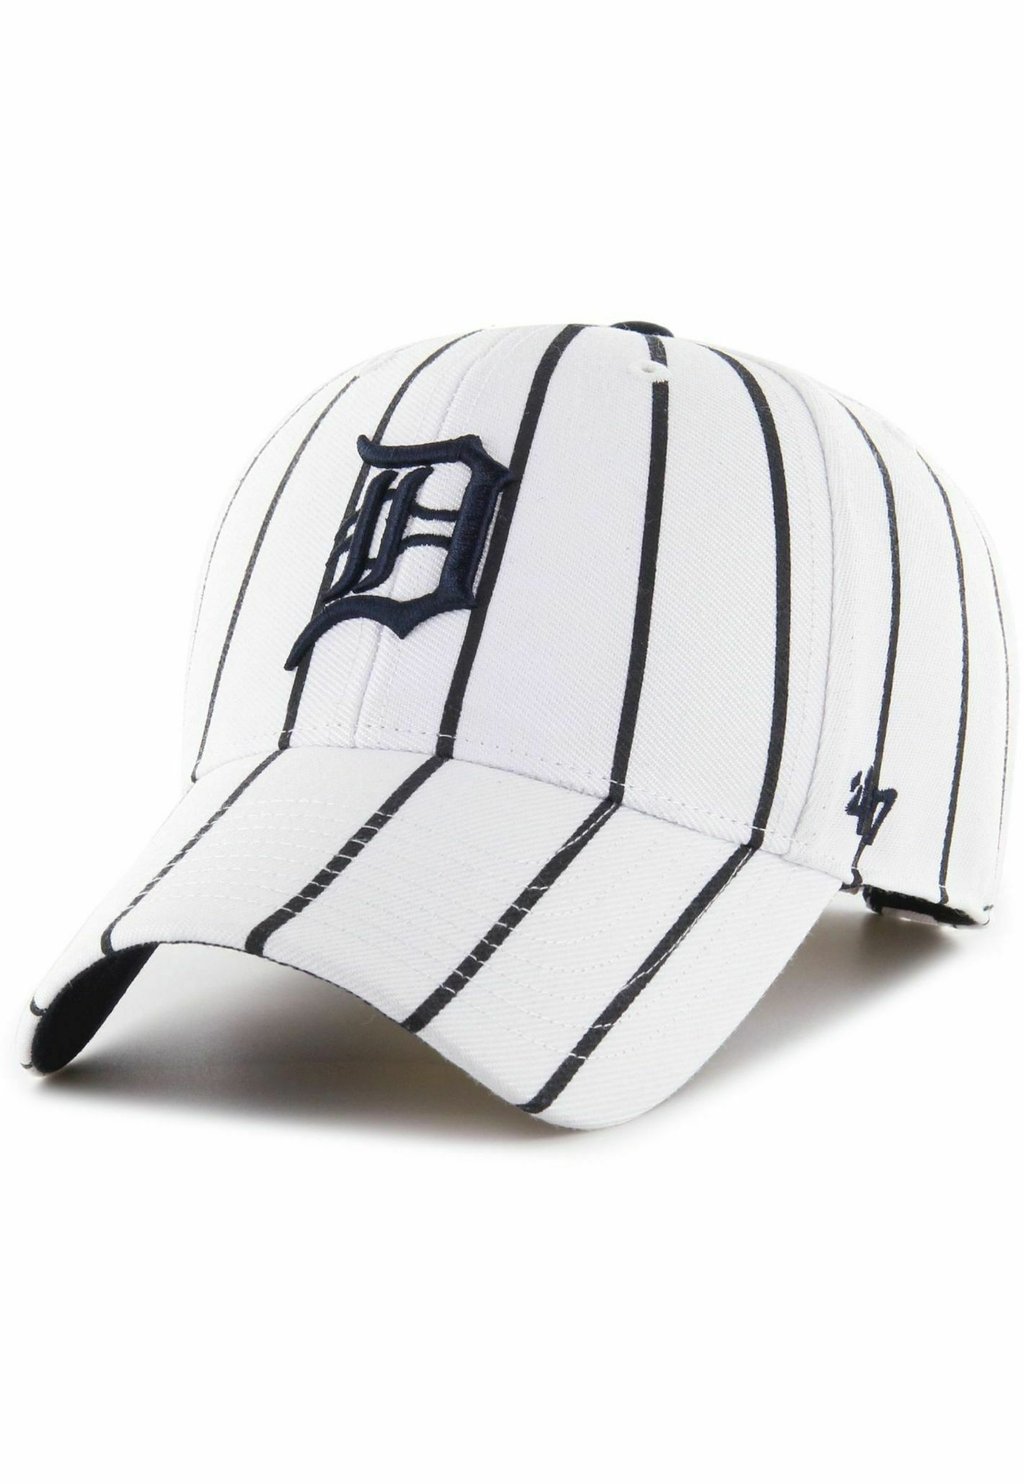 Бейсболка RELAXED FIT BIRD CAGE DETROIT TIGERS '47, цвет white